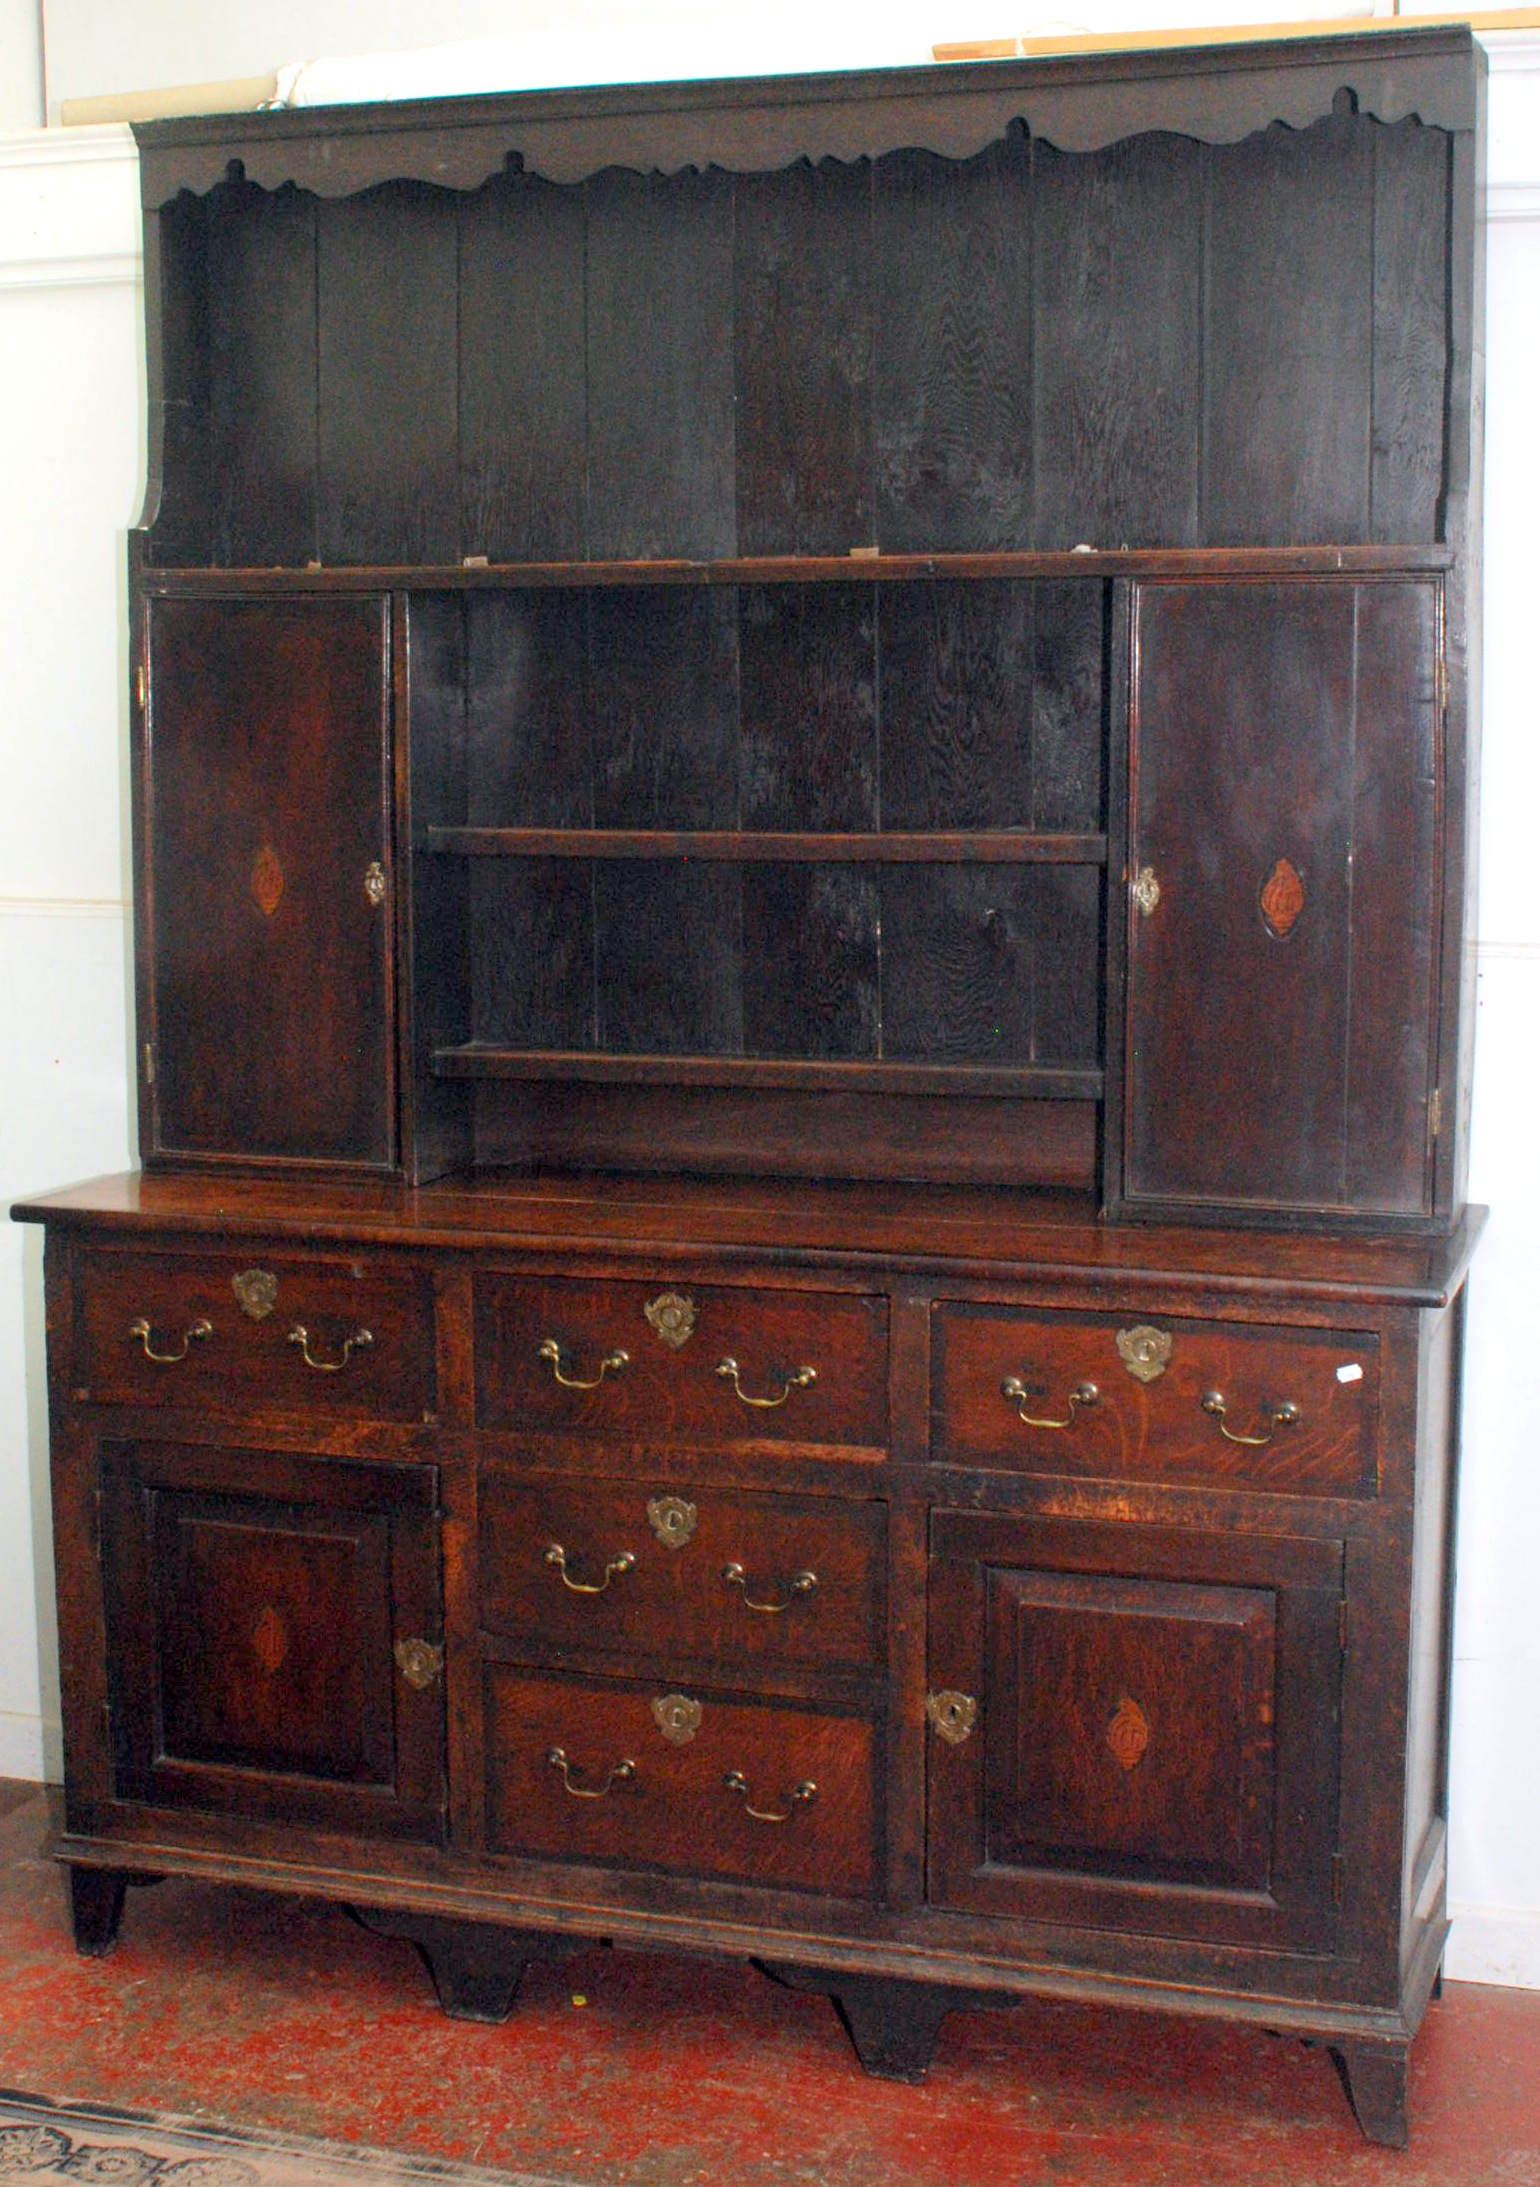 An oak 18th century dresser with cross-banding and inlaid shell motif, the upper section with open